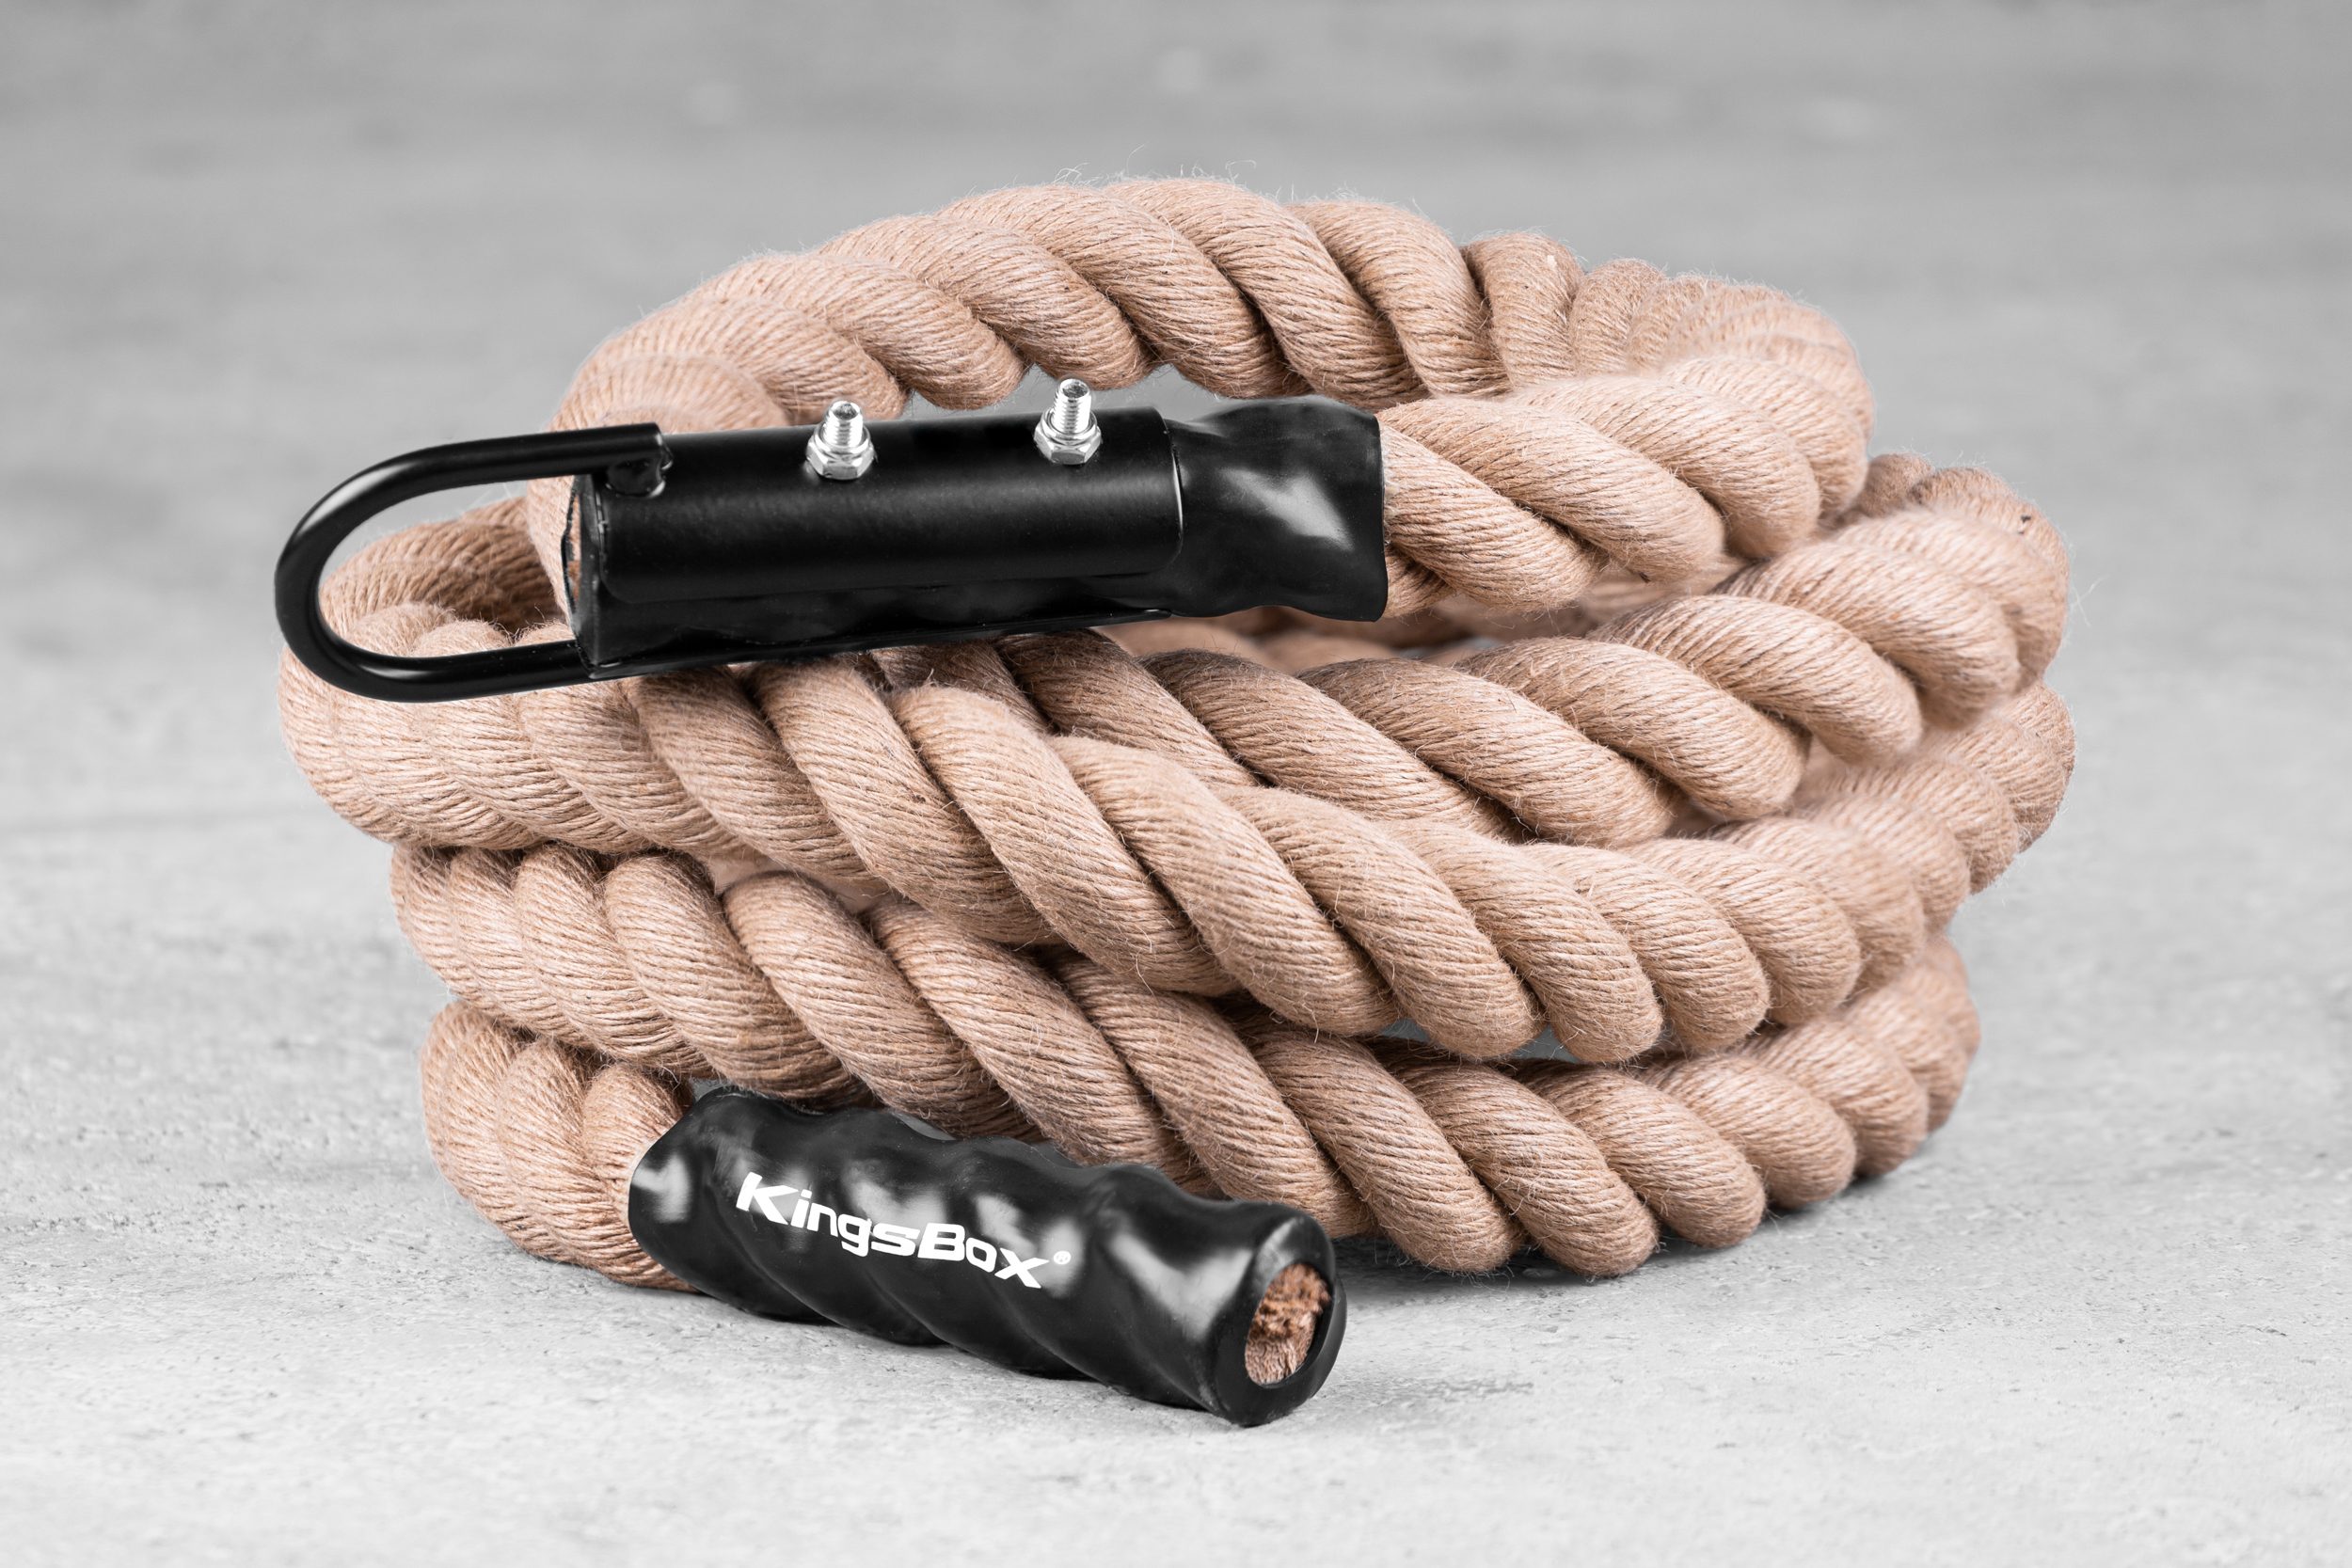 Outlet - KingsBox Climbing Rope - 6m